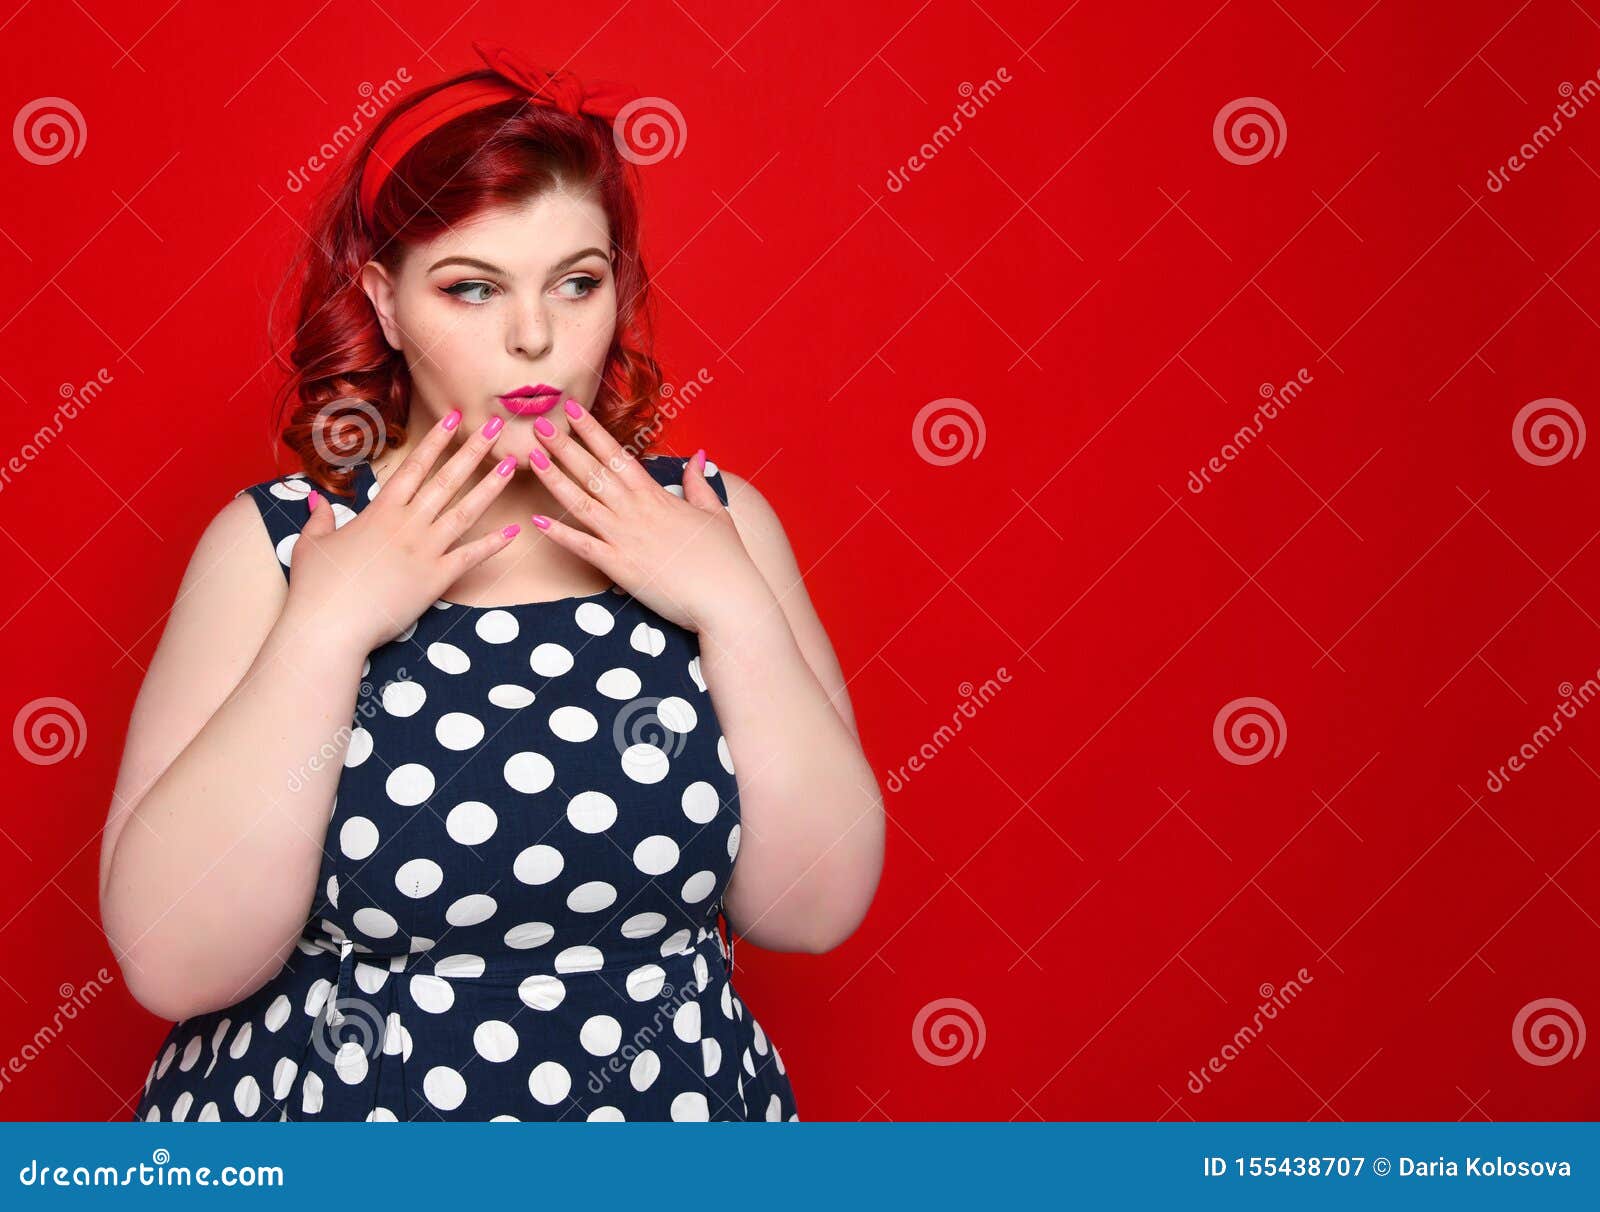 Retro. Full Length Of Woman Girl In Pinup Style Stock 